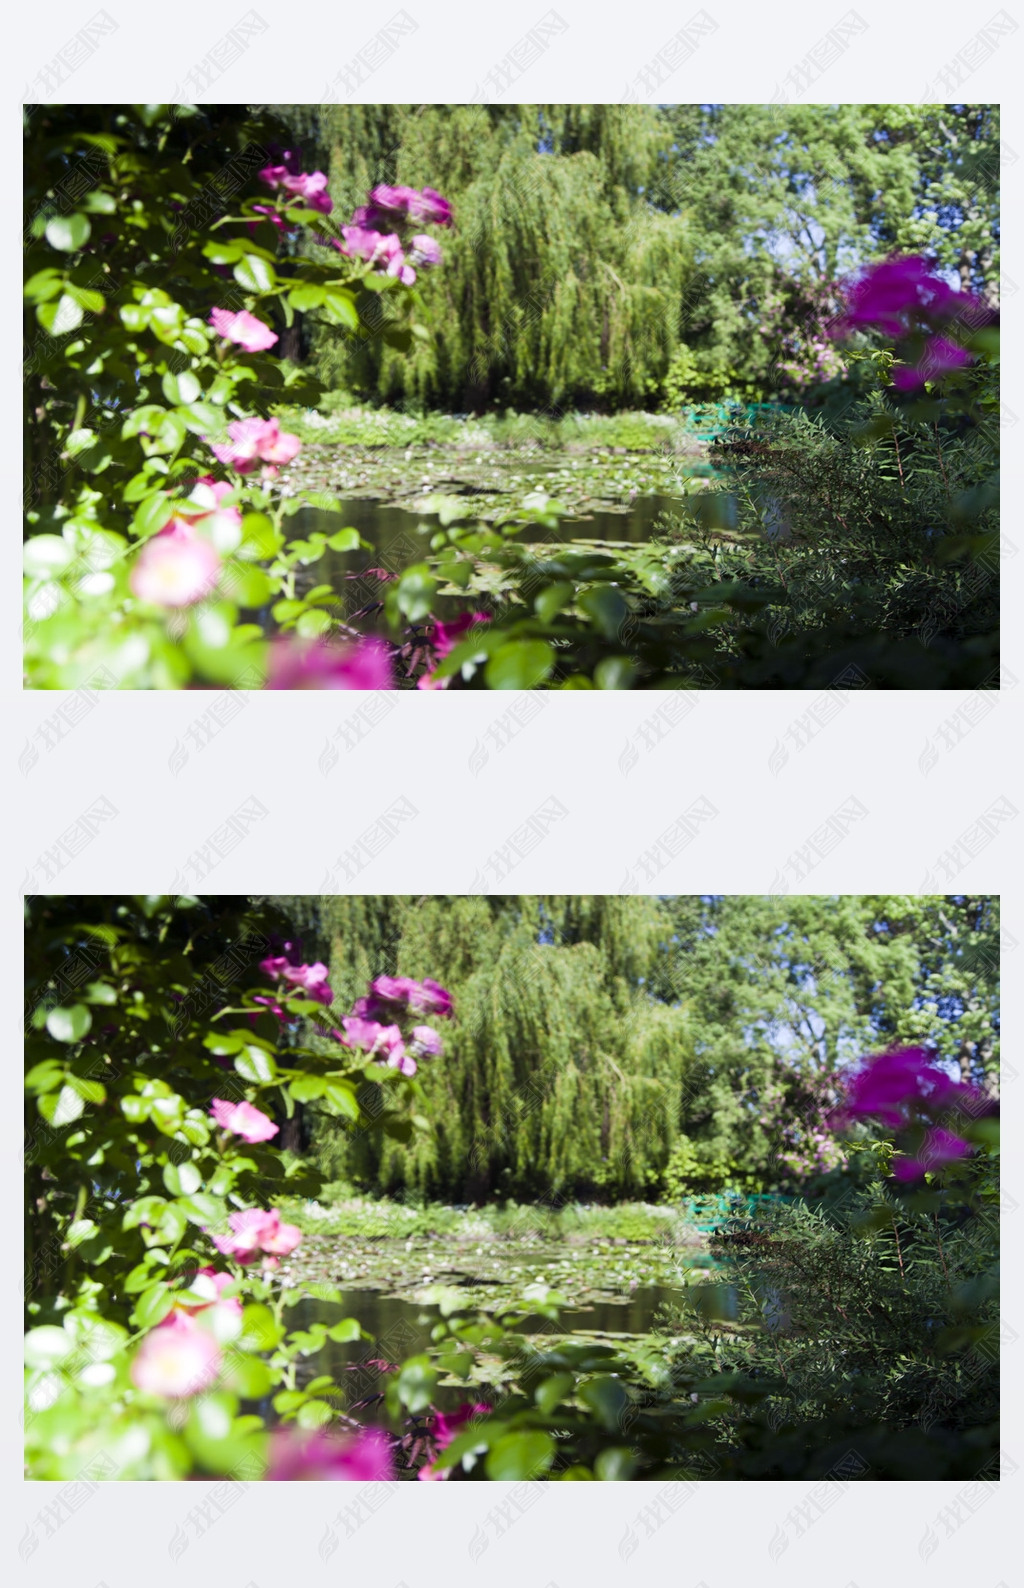 Trees and bushes with flowers around the lake with water lilies 